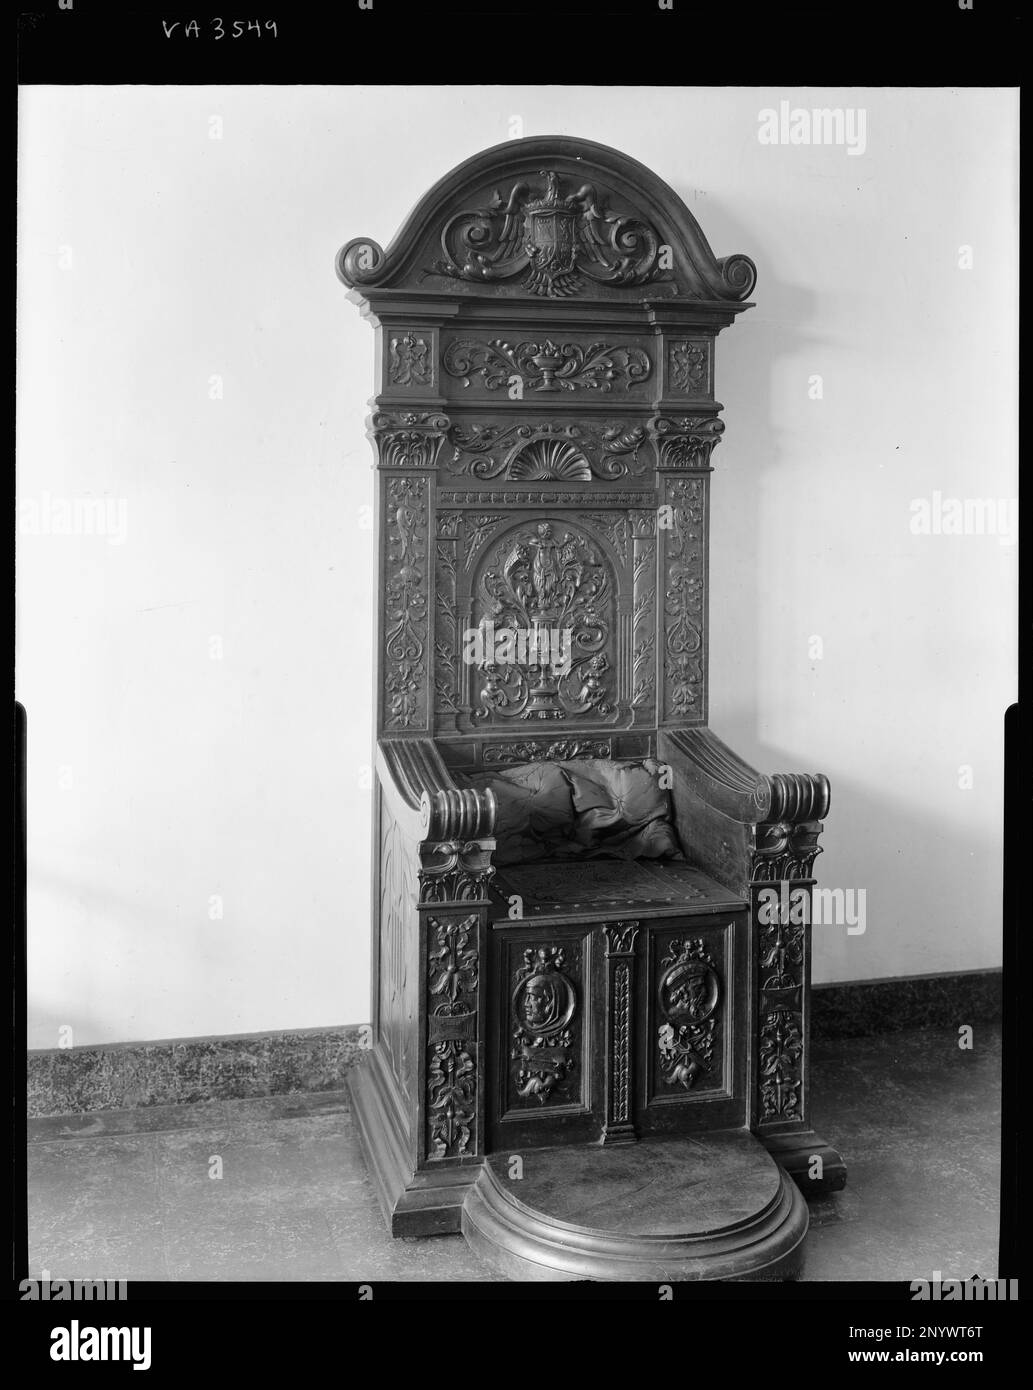 Virginia House, Mexican carved furniture, Richmond, Henrico County, Virginia. Carnegie Survey of the Architecture of the South. United States  Virginia  Henrico County  Richmond, Thrones, Woodwork. Stock Photo